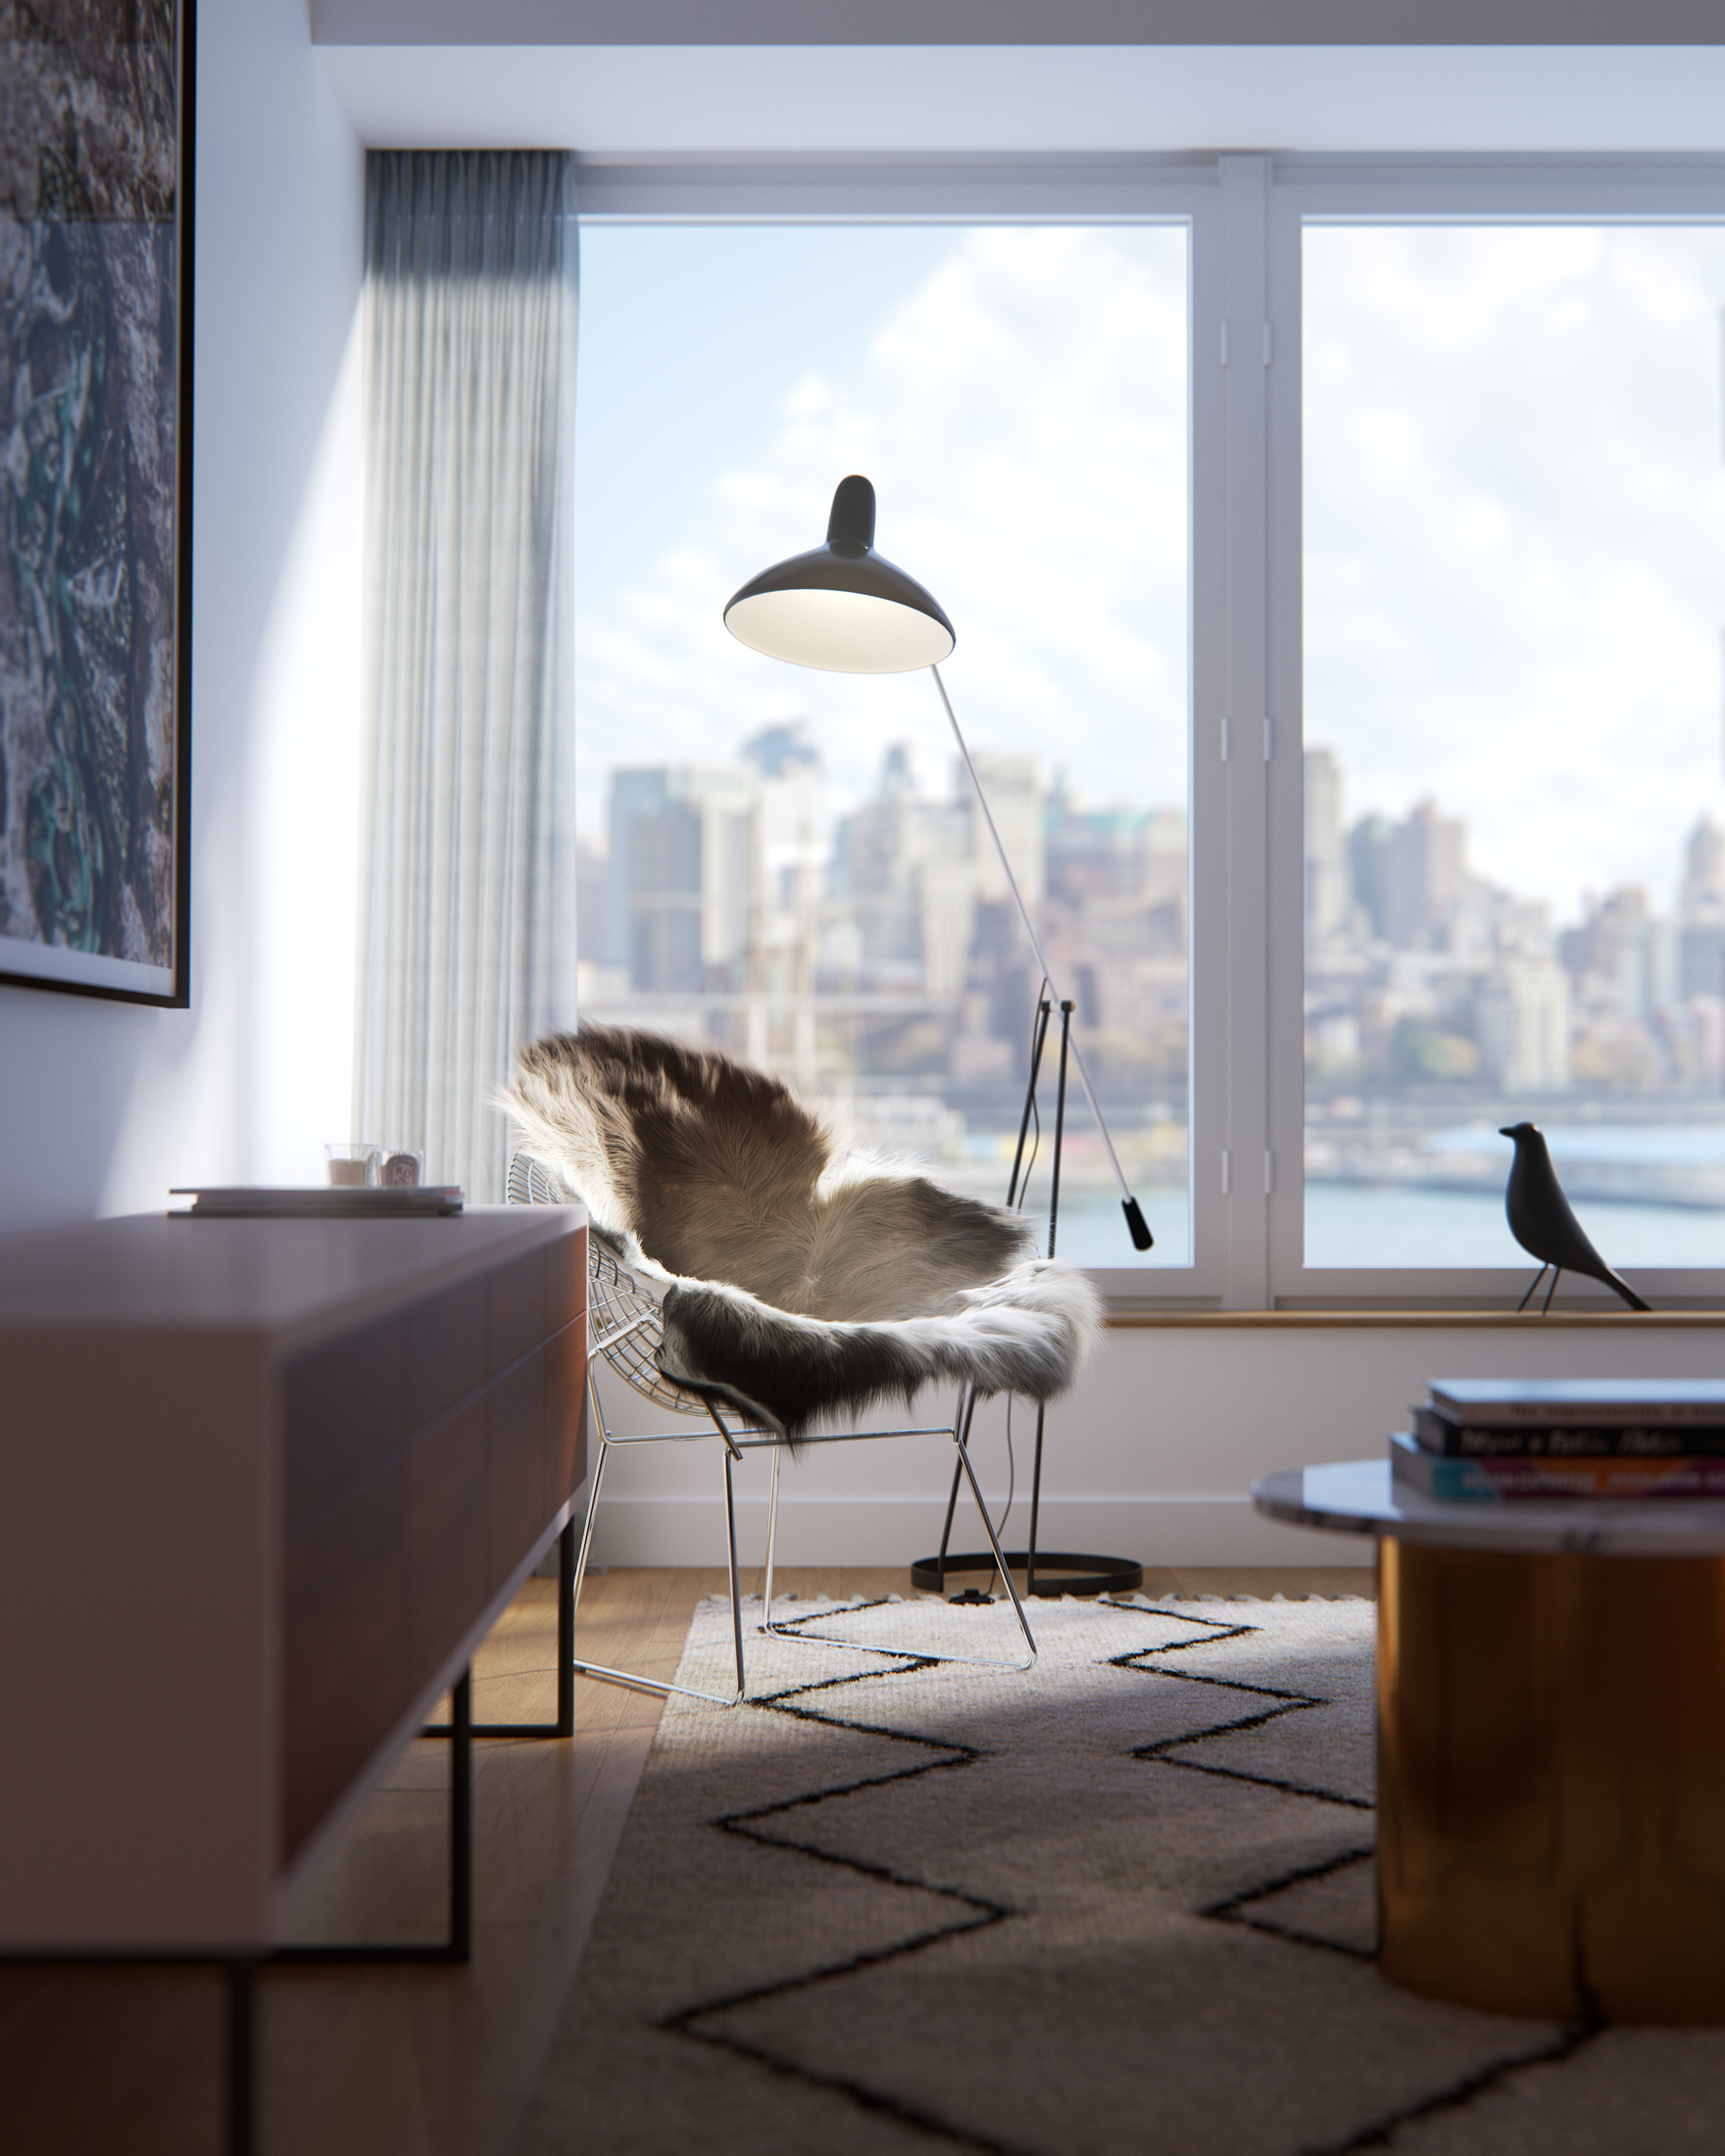 Architectural Rendering of the living room of the 180 Water Street project located in the Financial District, New York City